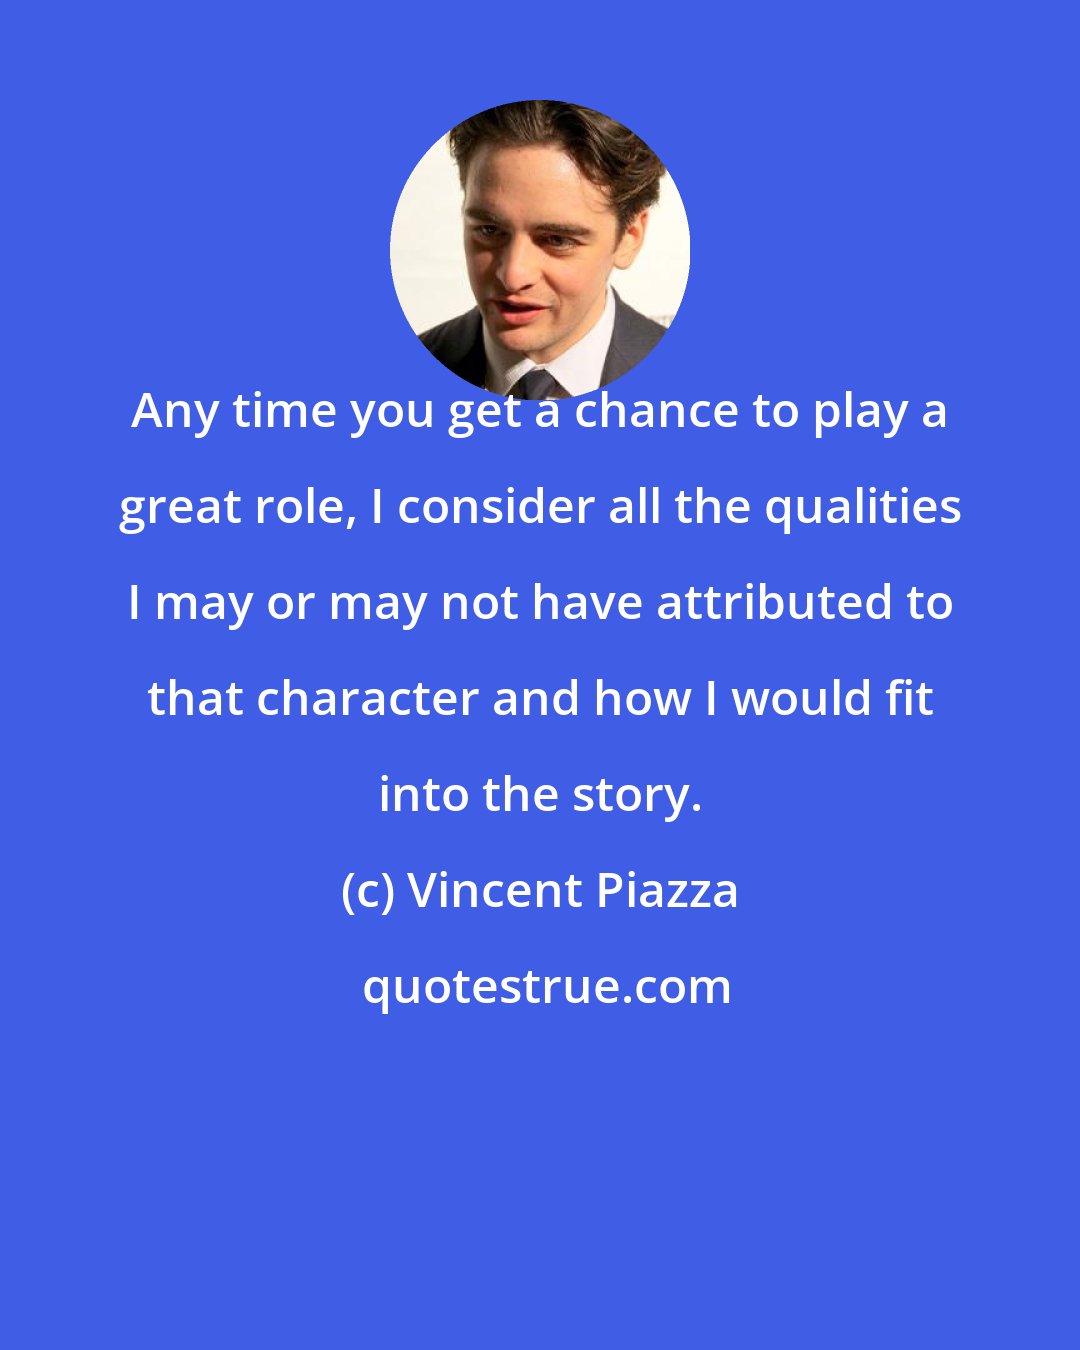 Vincent Piazza: Any time you get a chance to play a great role, I consider all the qualities I may or may not have attributed to that character and how I would fit into the story.